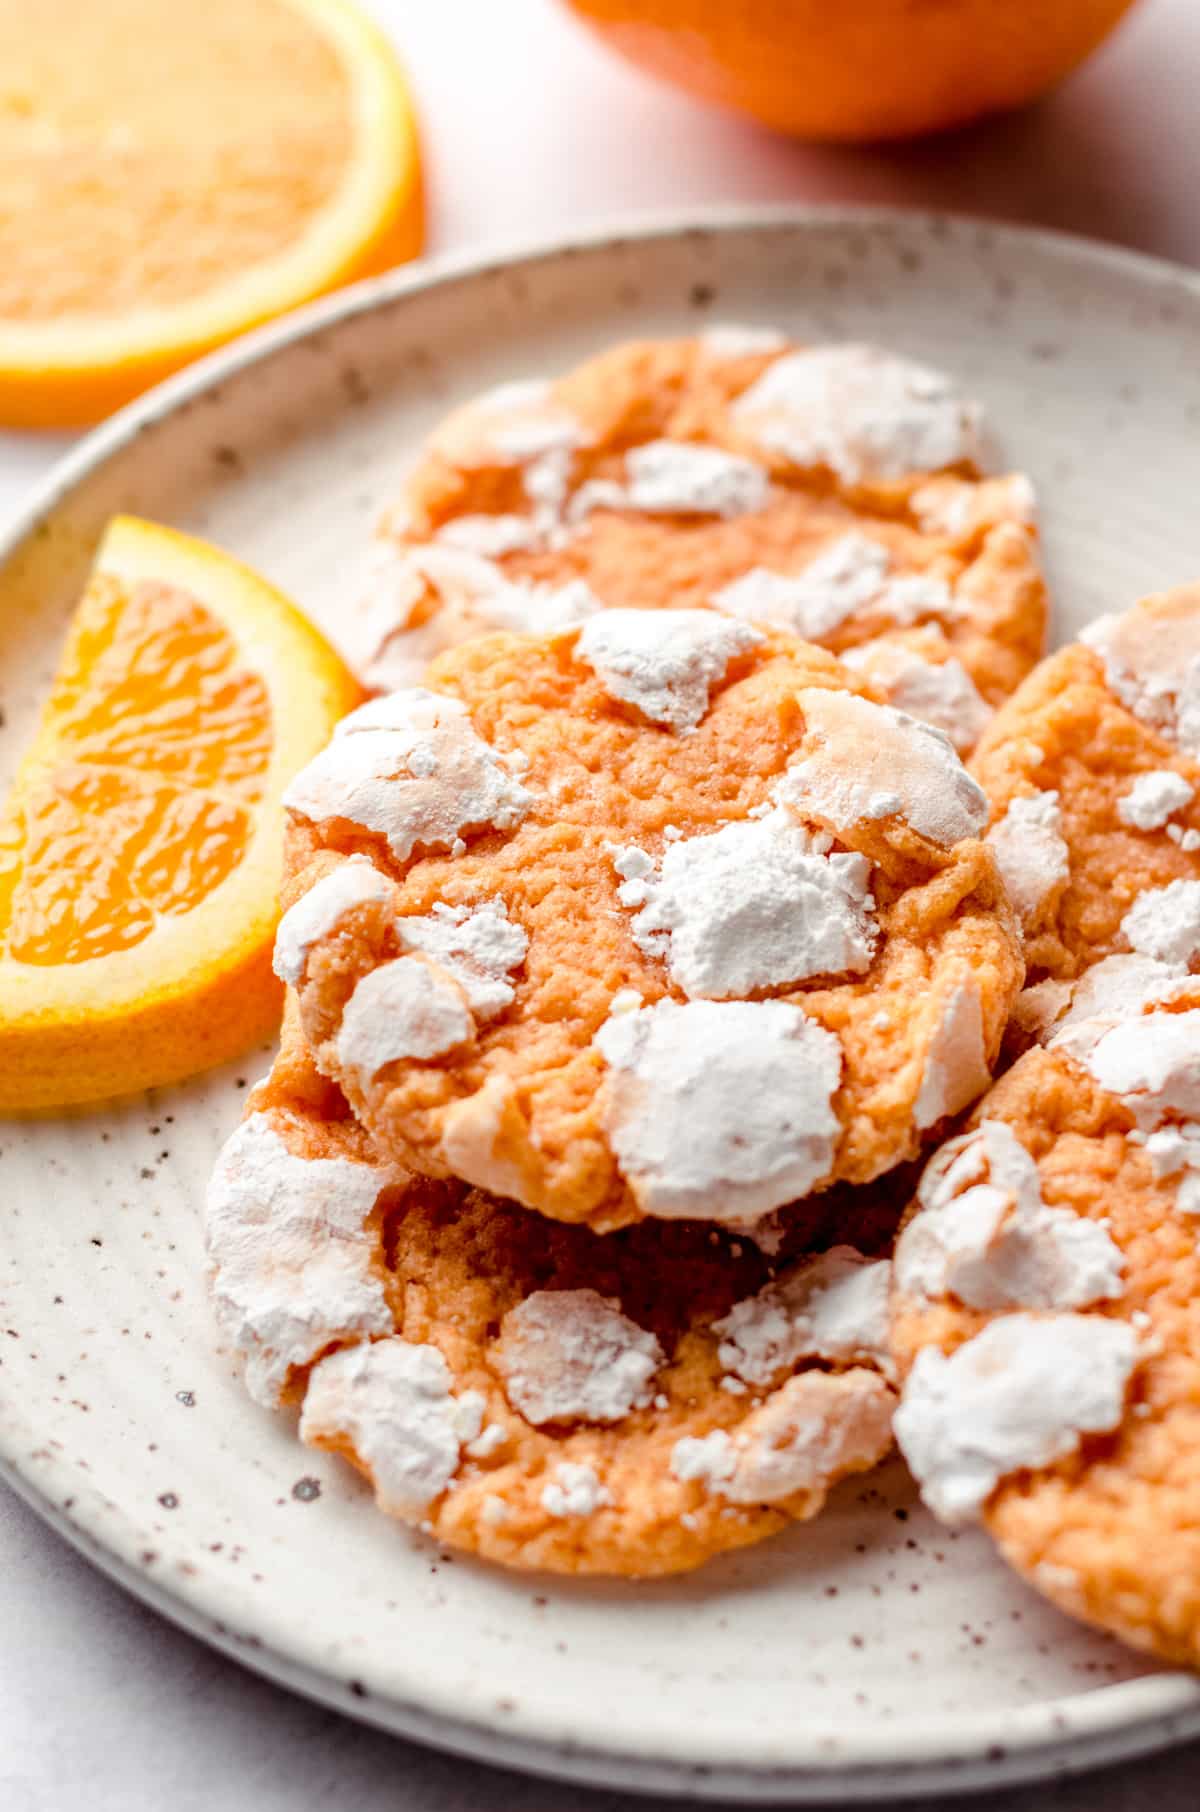 orange creamsicle cookies on a plate with orange slices